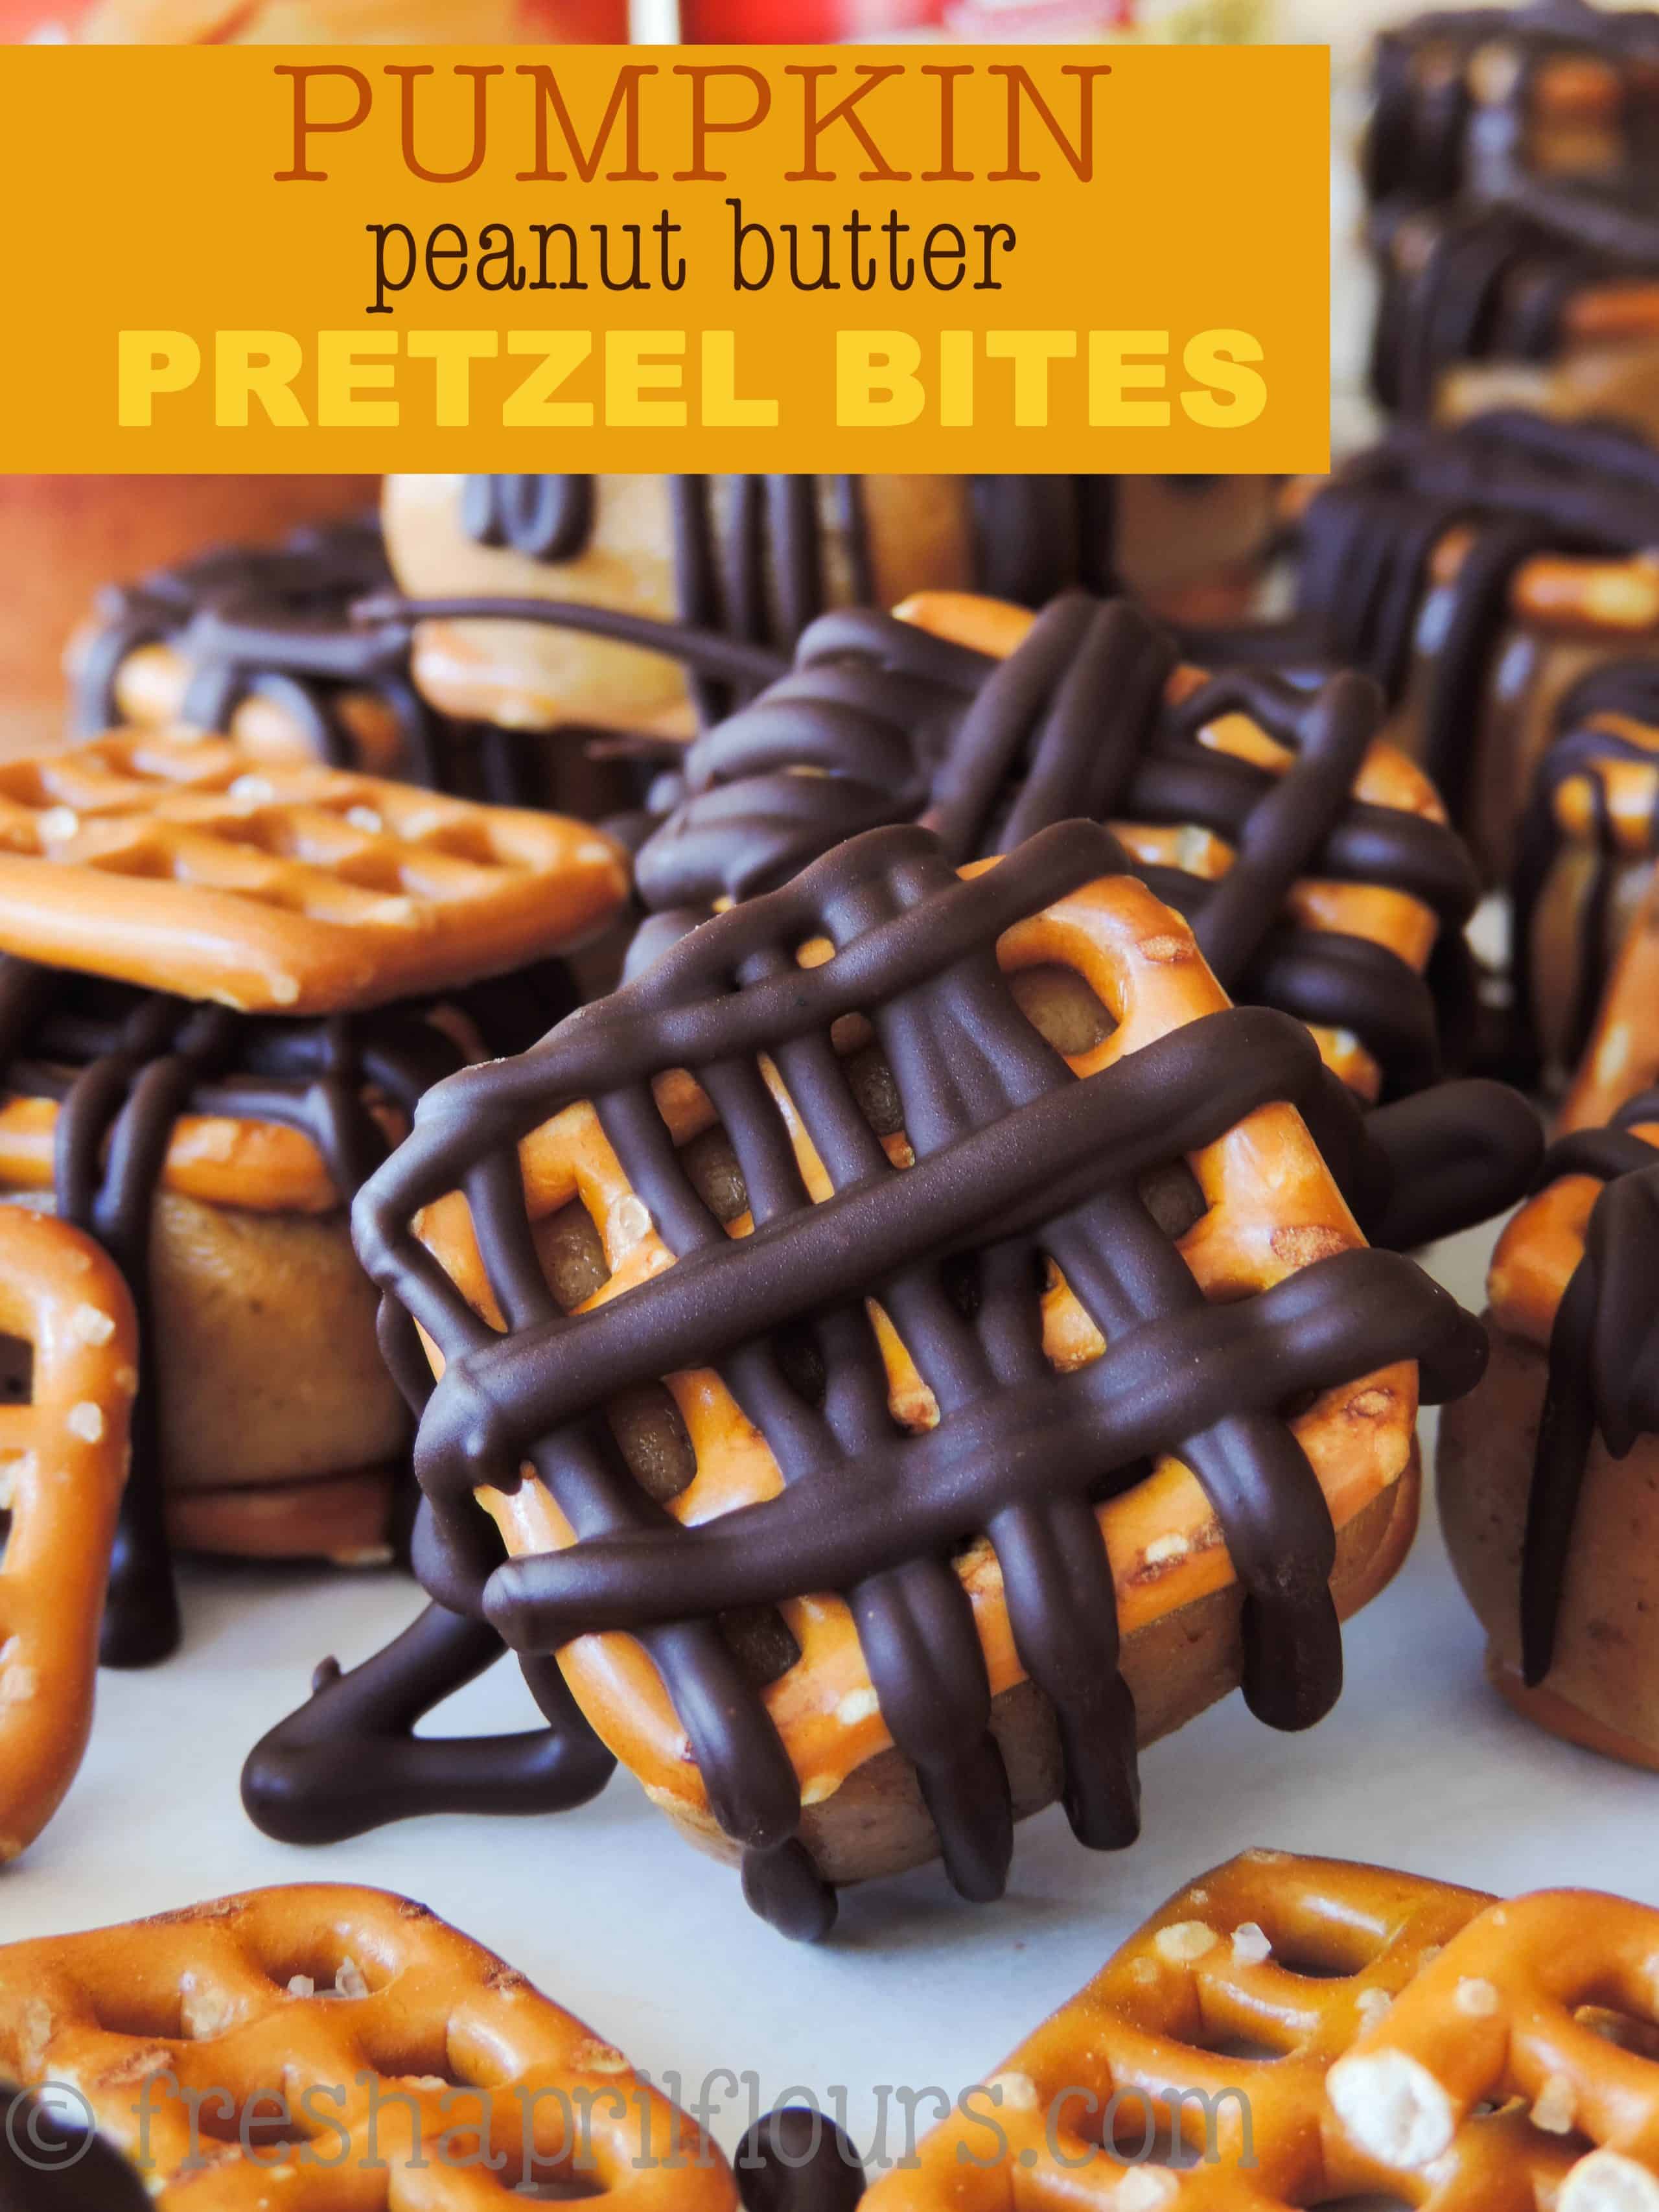 A gooey, nutty, and spicy blend of pumpkin and peanut butter, sandwiched between two pretzels and topped off with a chocolate coating. This is one flavor combination you must try for fall! via @frshaprilflours